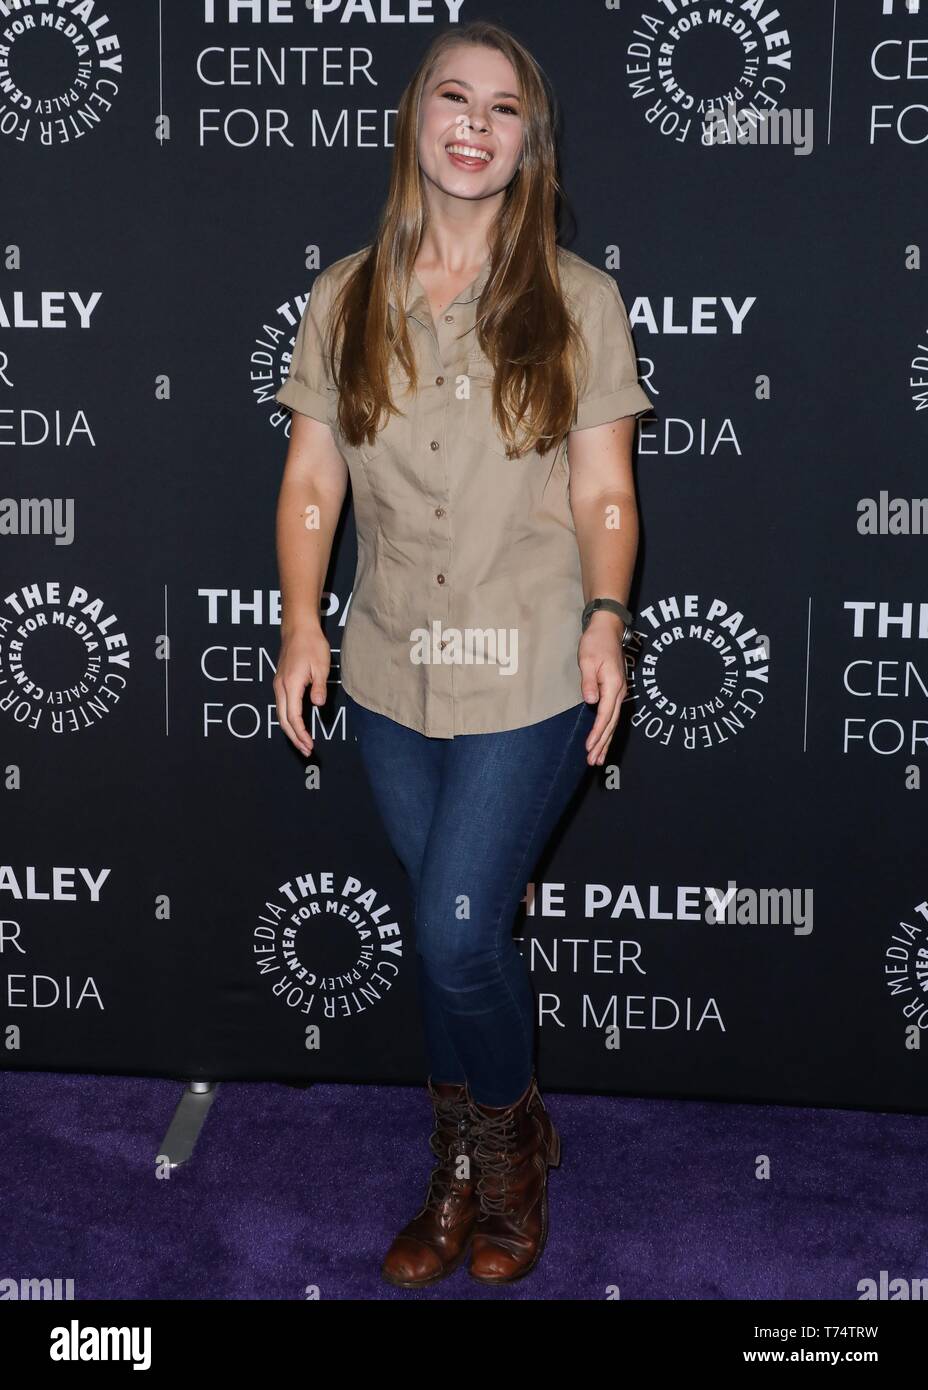 BEVERLY HILLS, LOS ANGELES, CALIFORNIA, USA - MAY 03: Bindi Irwin arrives at The Paley Center For Media Presents: An Evening With The Irwins: 'Crikey! It's The Irwins' Screening And Conversation held at The Paley Center for Media on May 3, 2019 in Beverly Hills, Los Angeles, California, United States. (Photo by David Acosta/Image Press Agency) Stock Photo